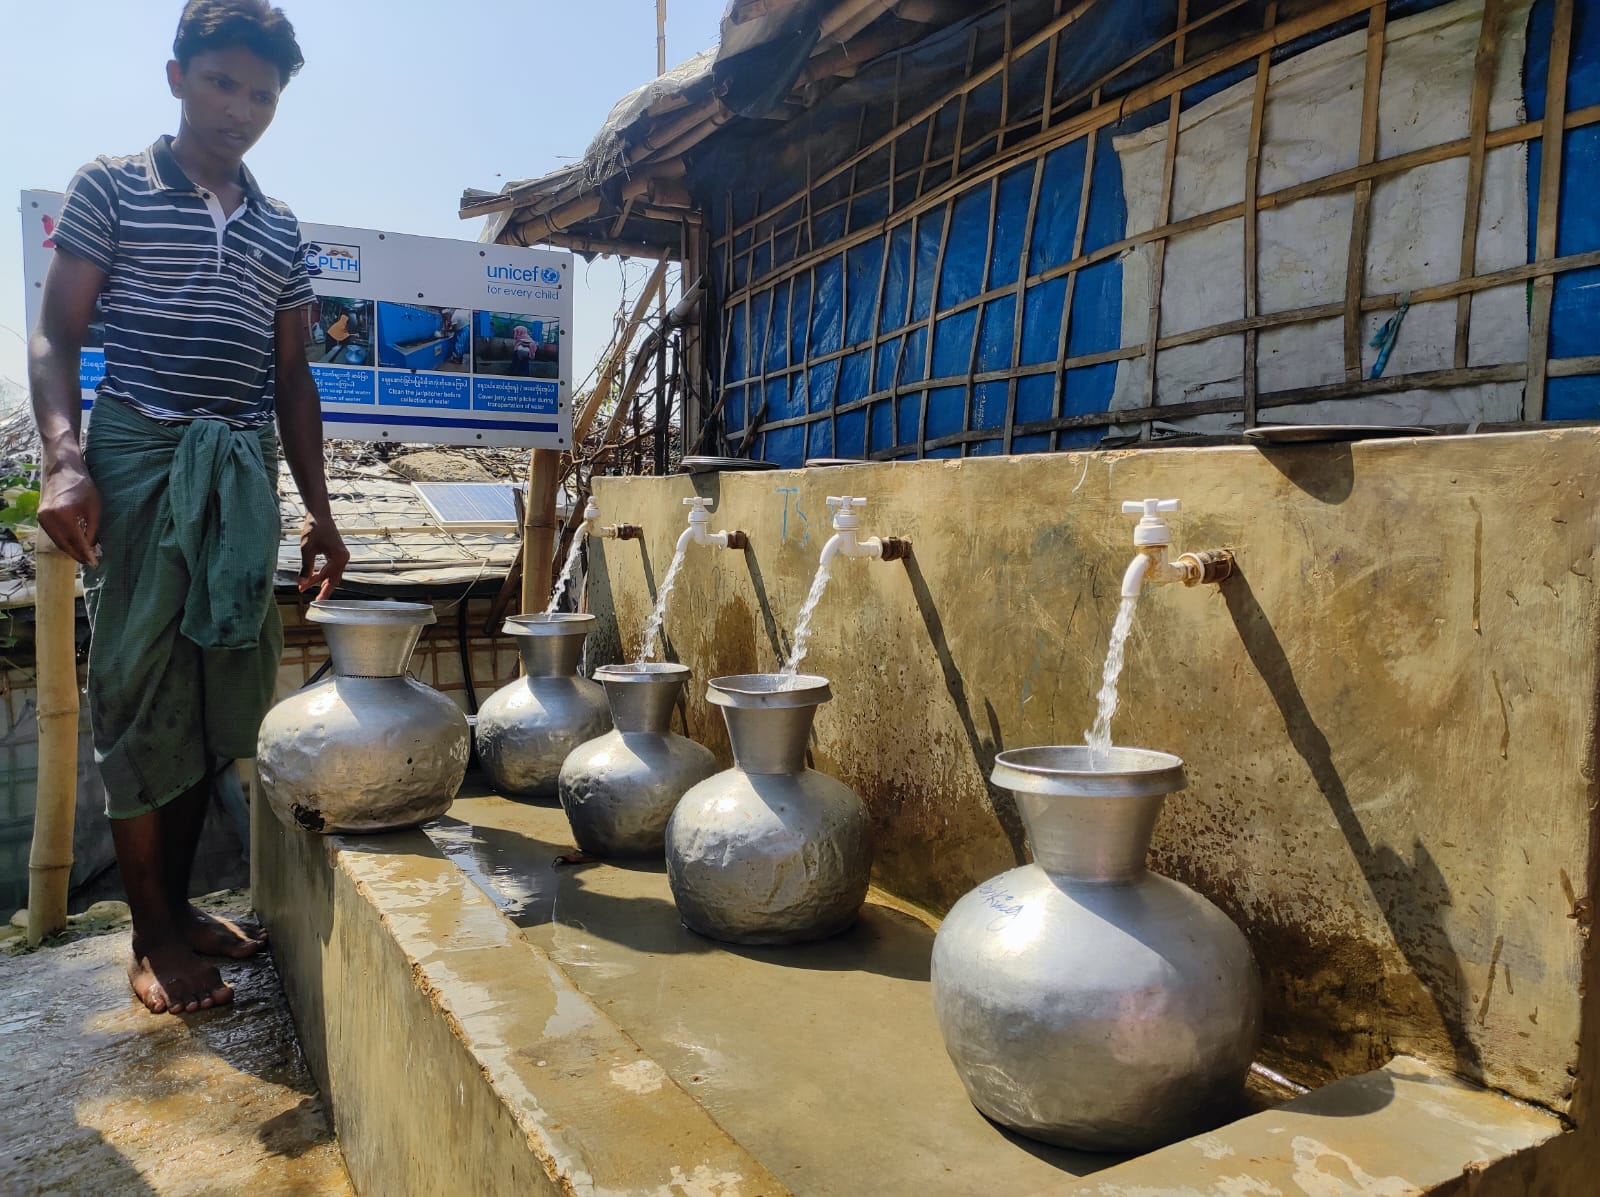 A man watches as four taps of clean water flow into metal jugs